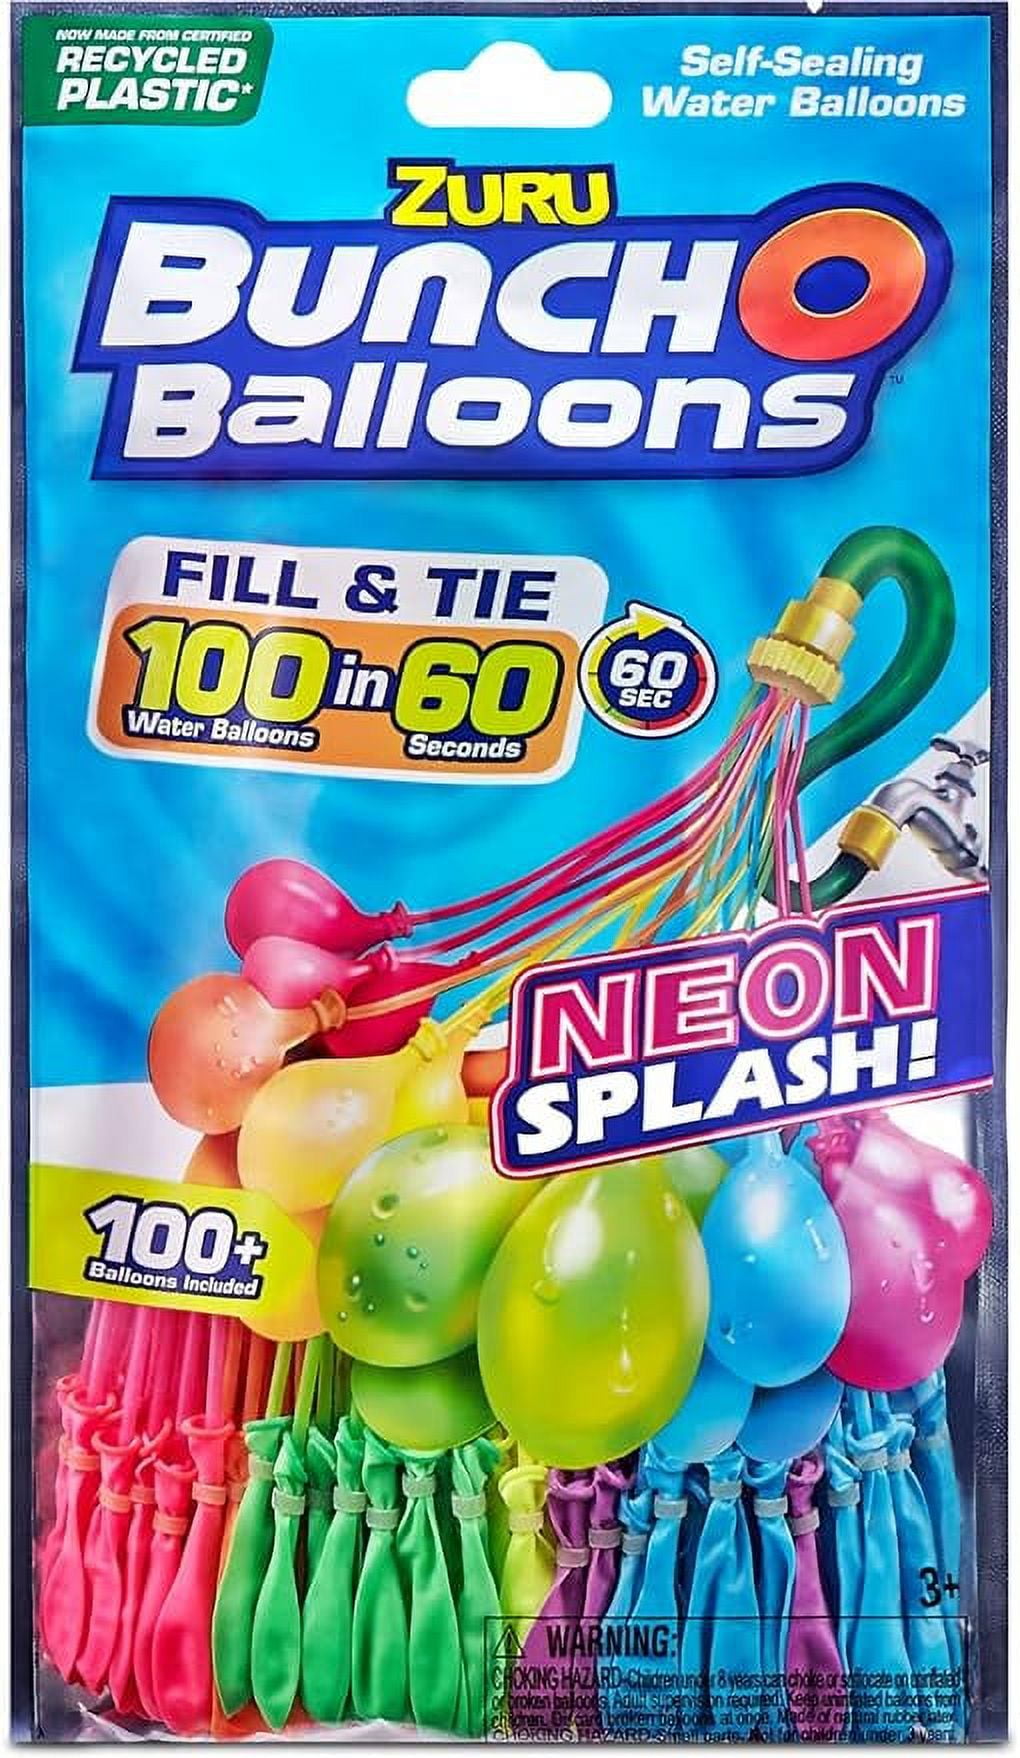 Bunch O Balloons Neon (3 Bunches) by ZURU, 100+ Rapid-Filling Self